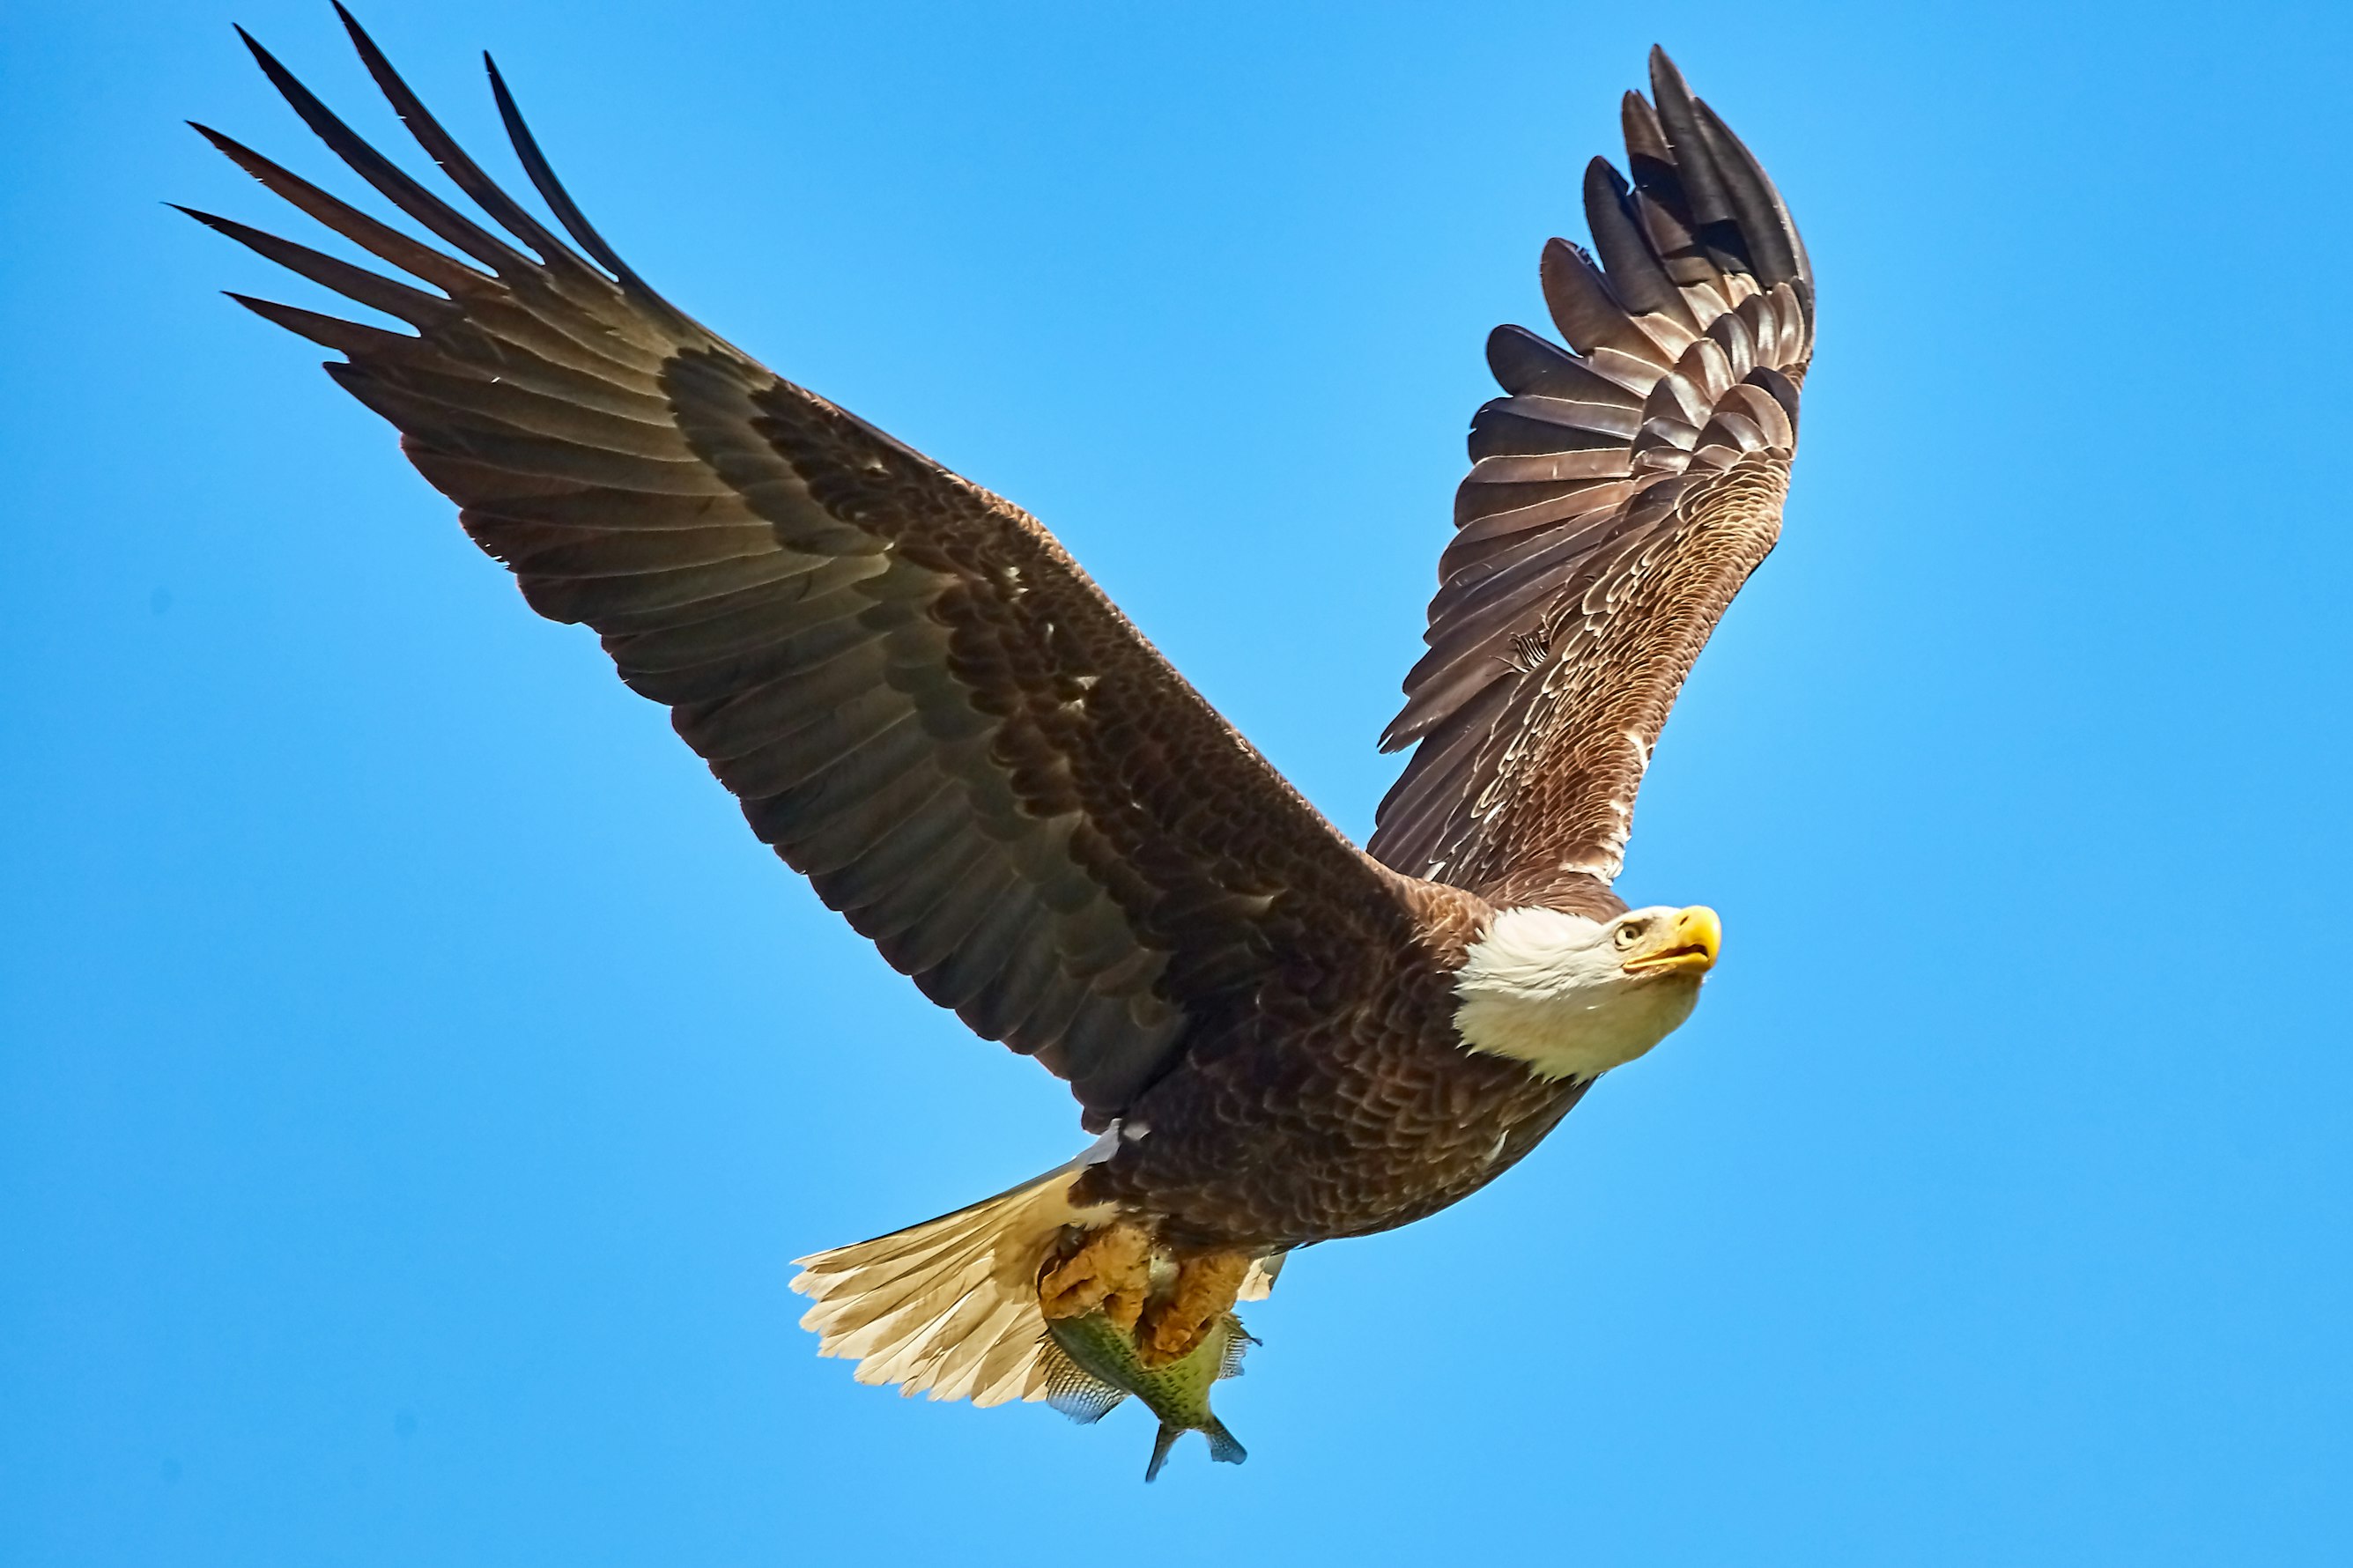 Nearly Half of US Bald Eagles Suffer Lead Poisoning